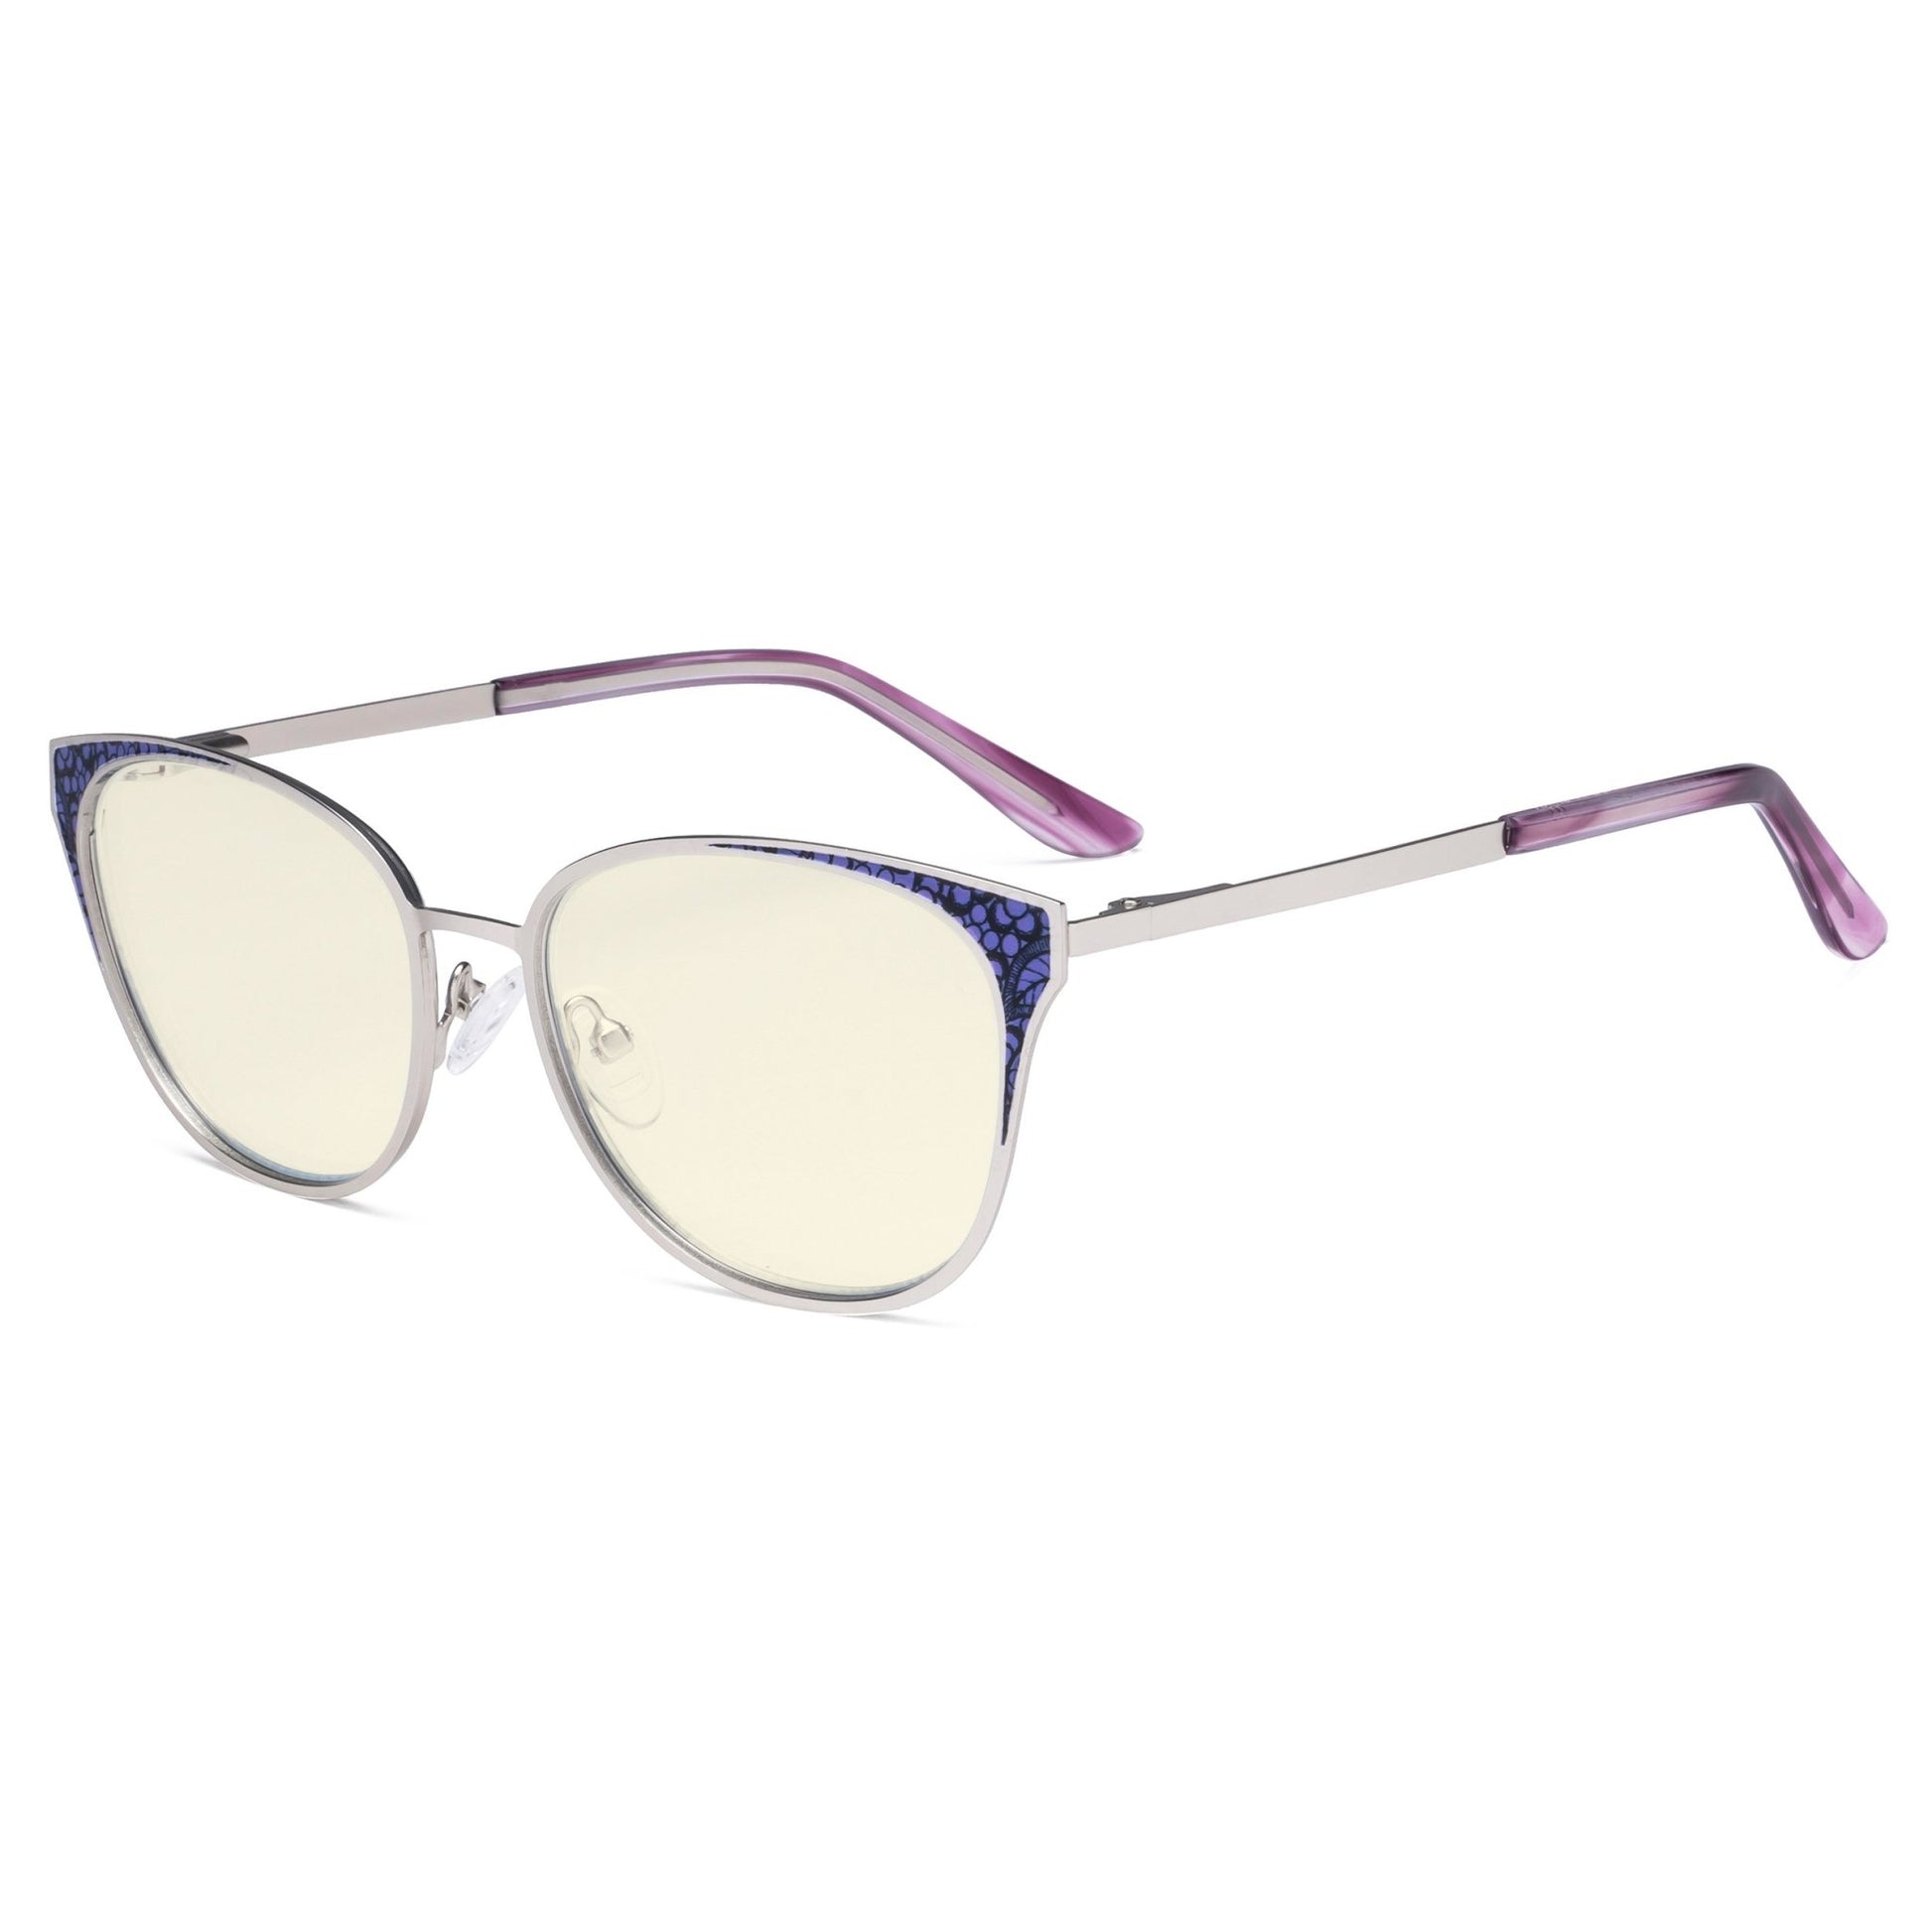 Butterfly Design Computer Eyeglasses Silver LX19045-BB40